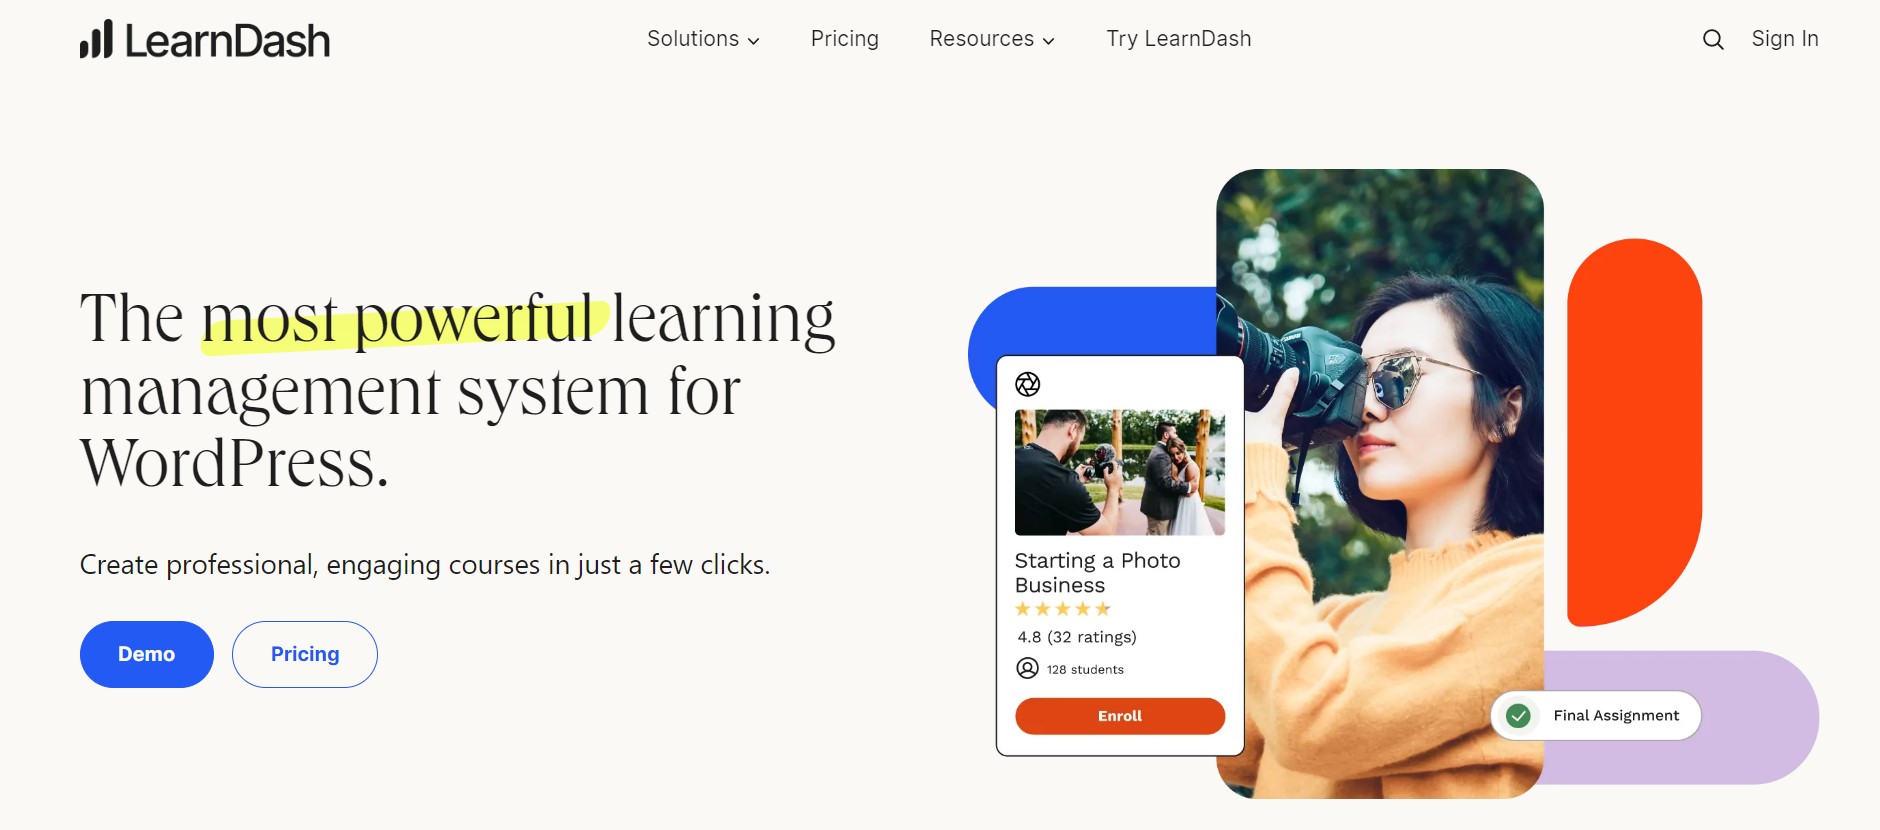 How to create a website with learndash